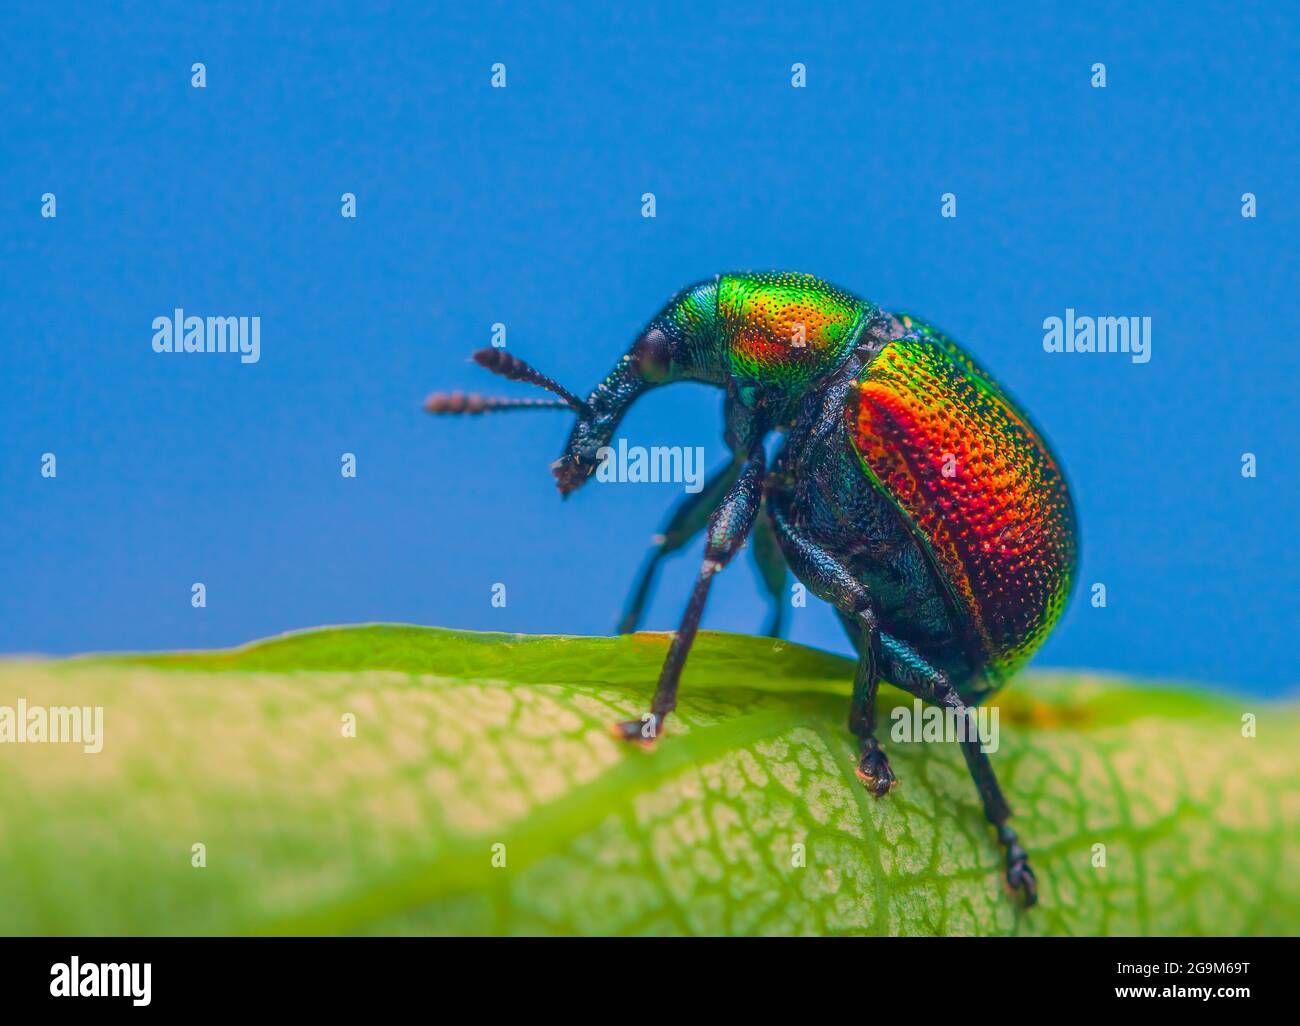 Leaf rolling weevil, Byctiscus betulae beetle on a leaf in an unusual pose, shiny colorful beetle Stock Photo